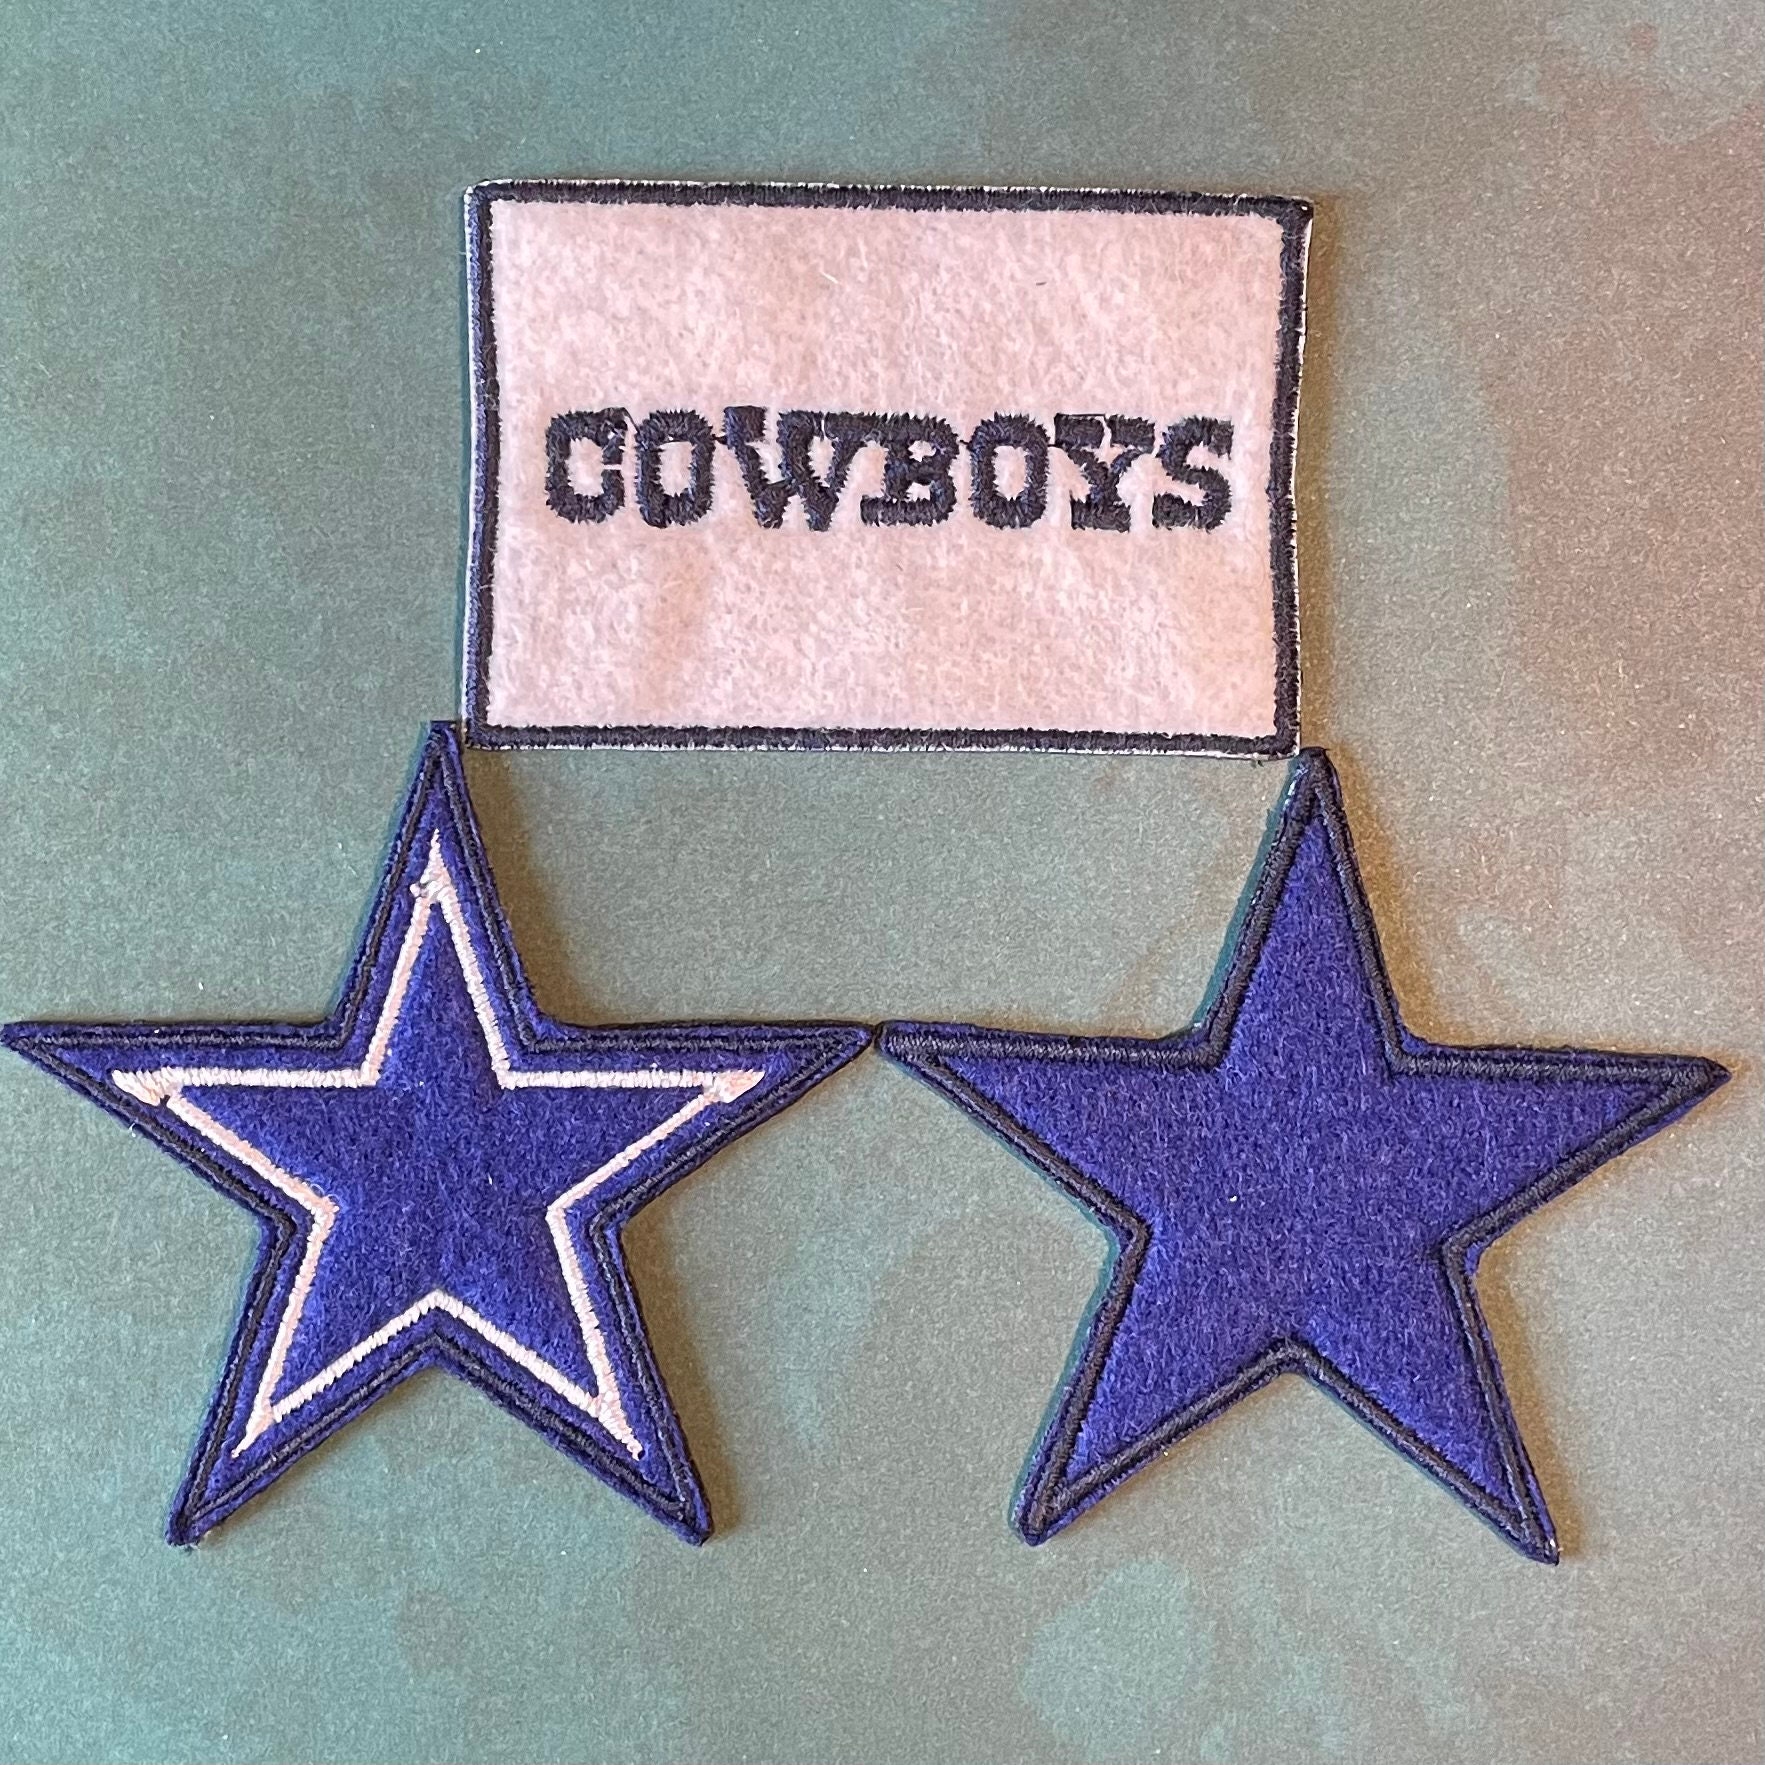 Dallas Cowboys Iron On patch NFL football pink diy  Customised denim  jacket, Iron on patches, Dallas cowboys